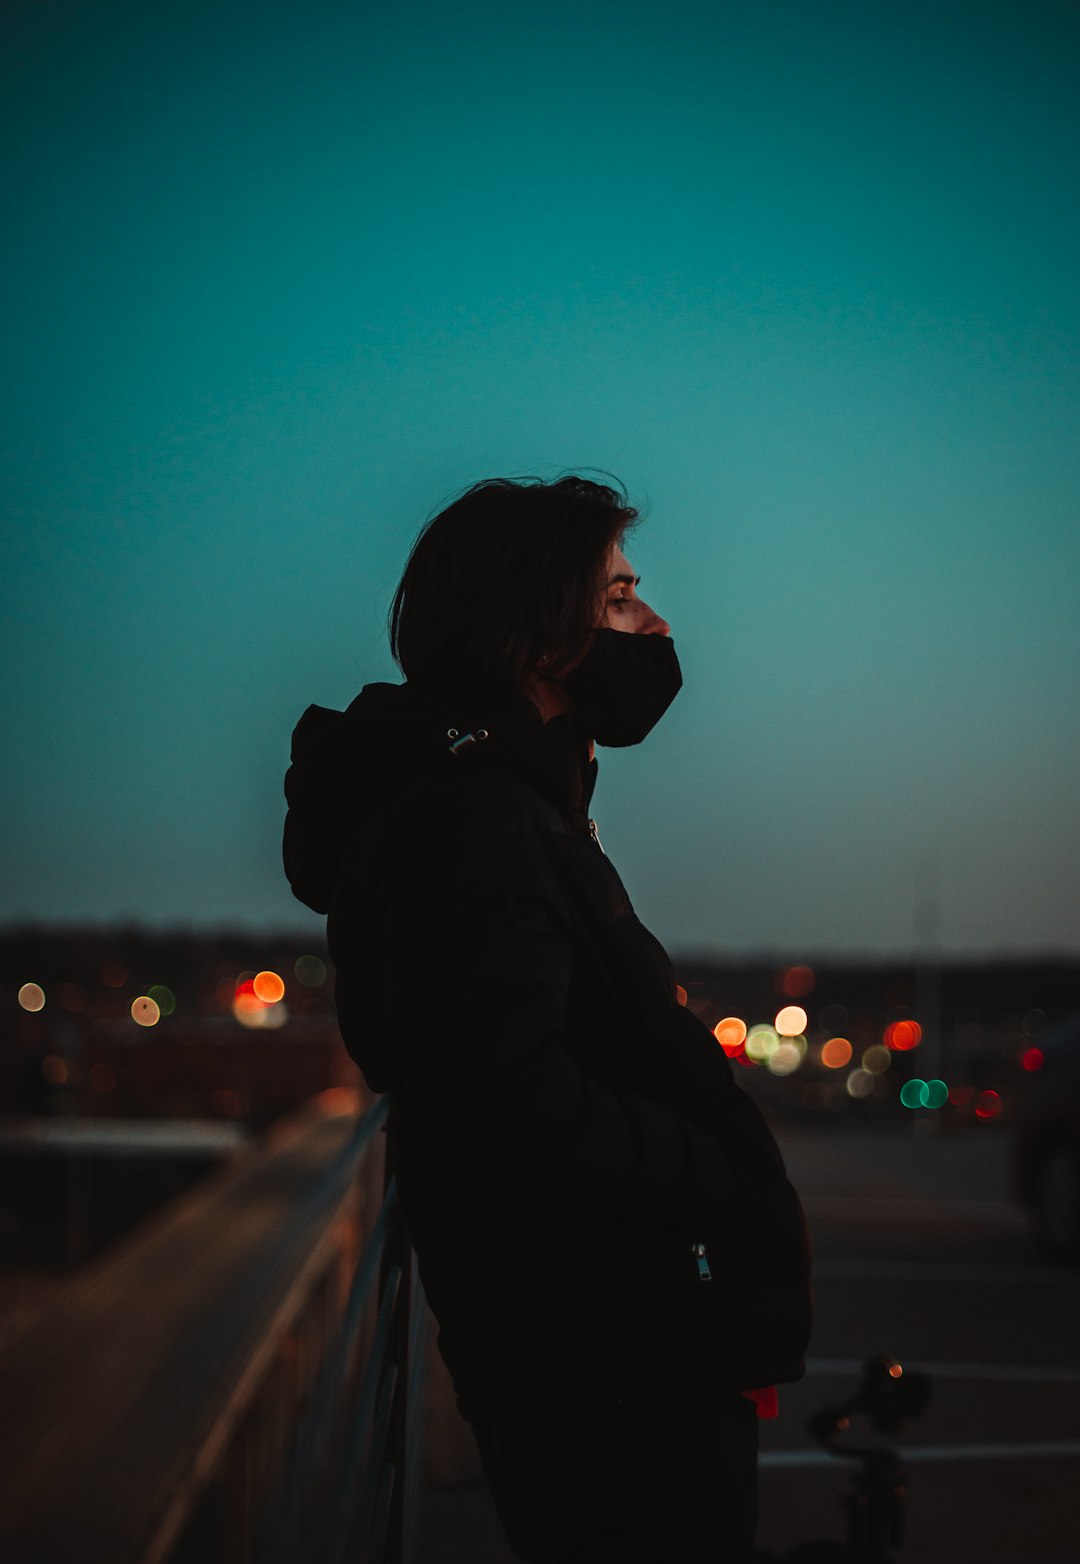 silhouette of woman standing during night time